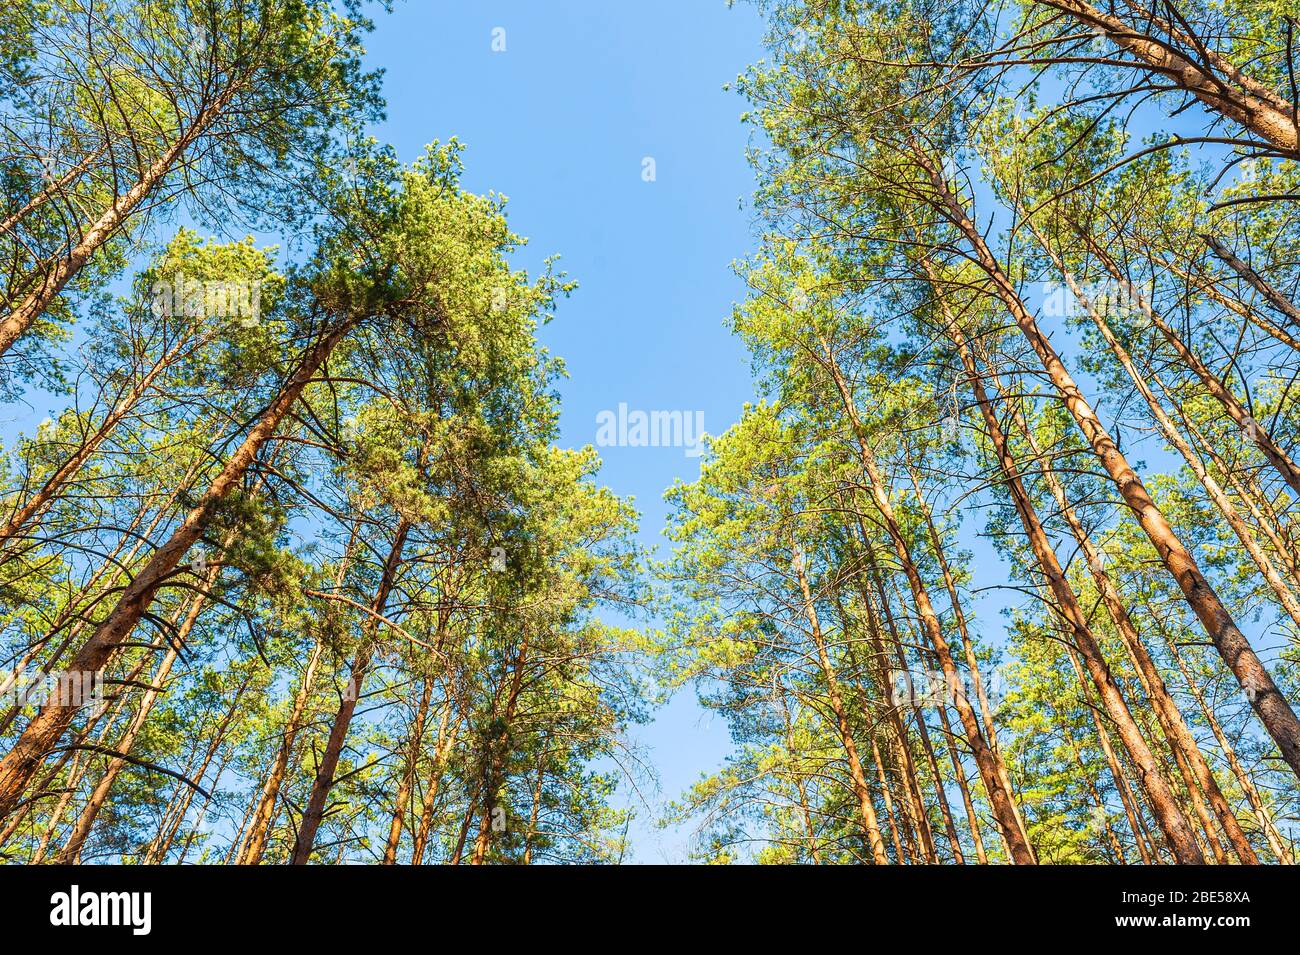 tall beautiful coniferous pine trees against a blue sunny sky Stock Photo